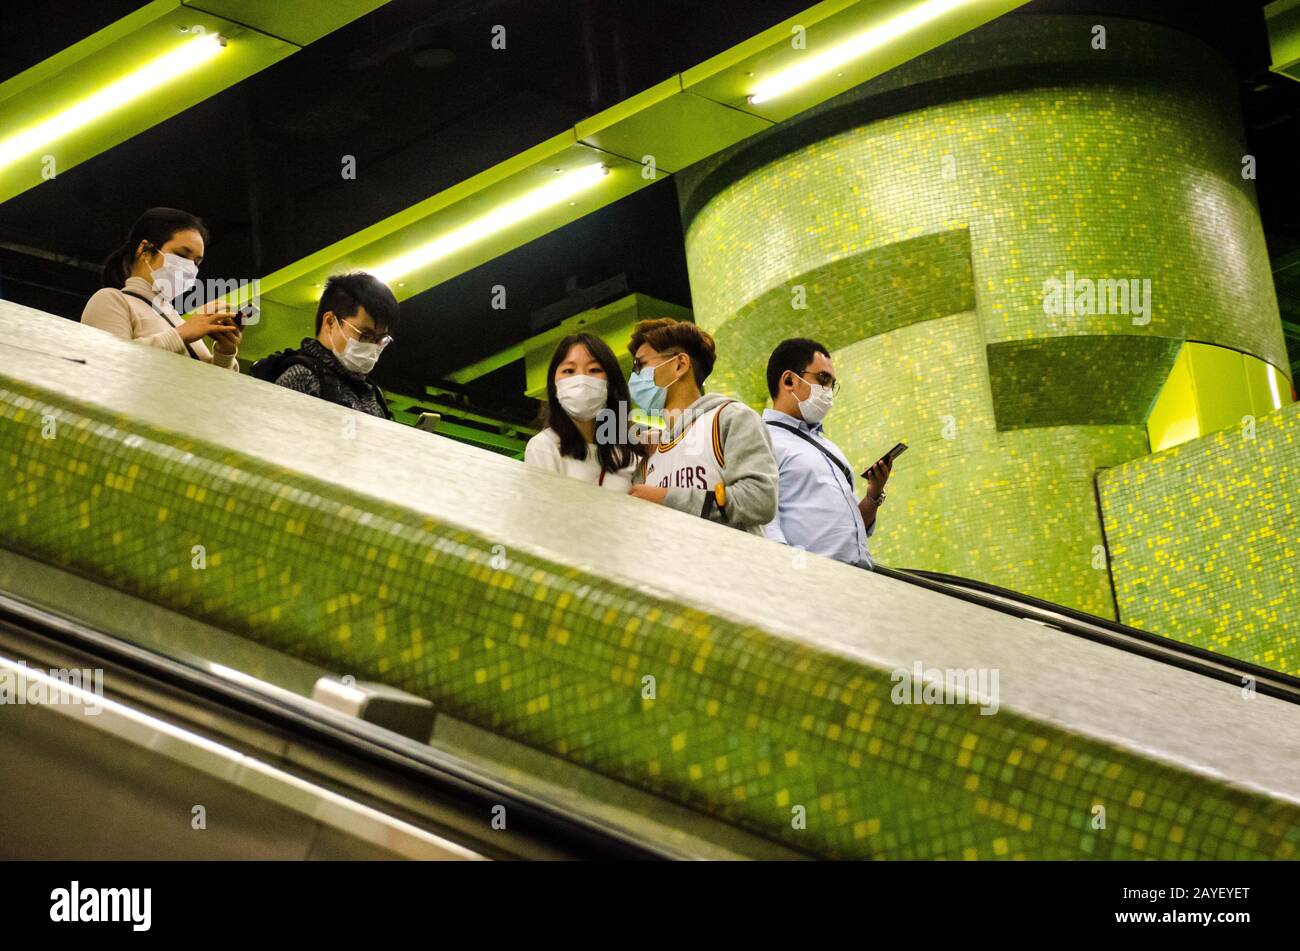 People and commuters wearing face masks in the Metro Mass Transit Railway in Hong Kong during novel coronavirus Covid-19 outbreak February 2020 Stock Photo